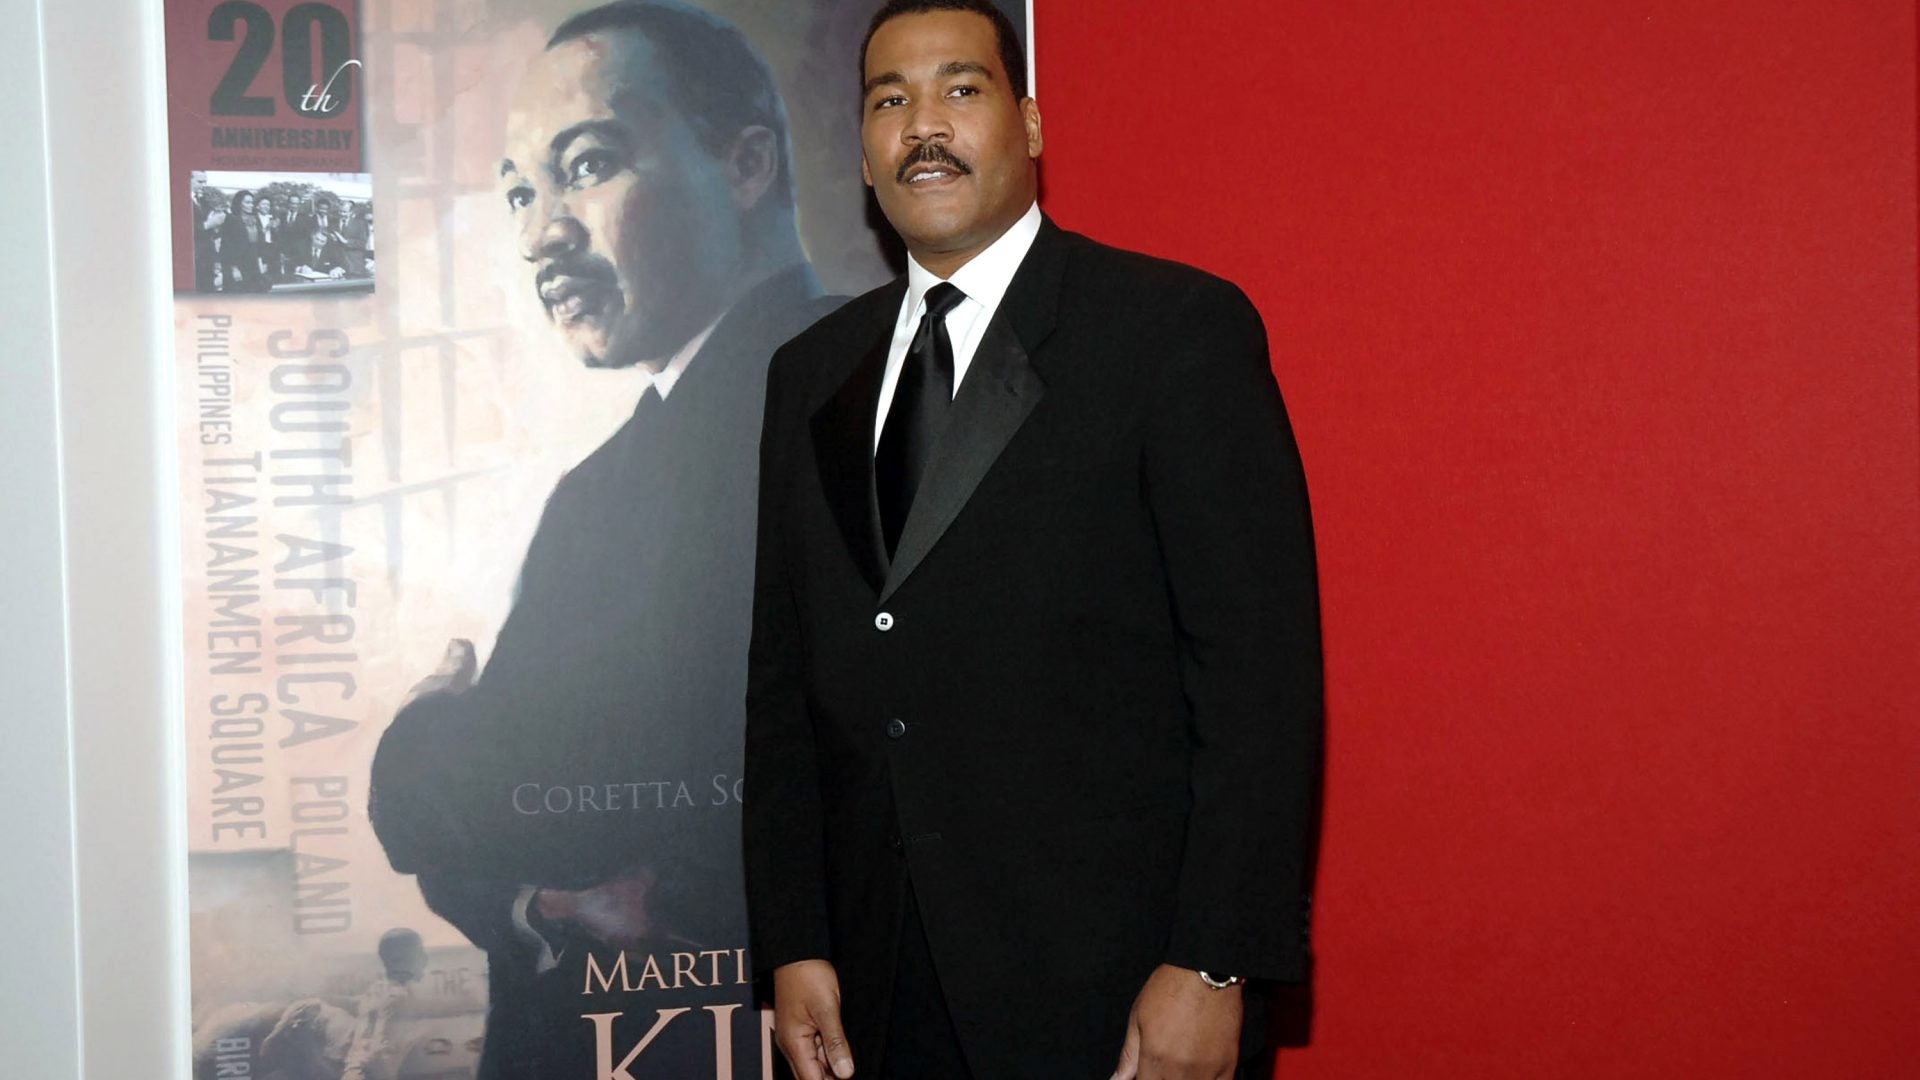 Dexter King, Son Of Dr. Martin Luther King Jr. And Coretta Scott King, Dies Of Cancer At 62